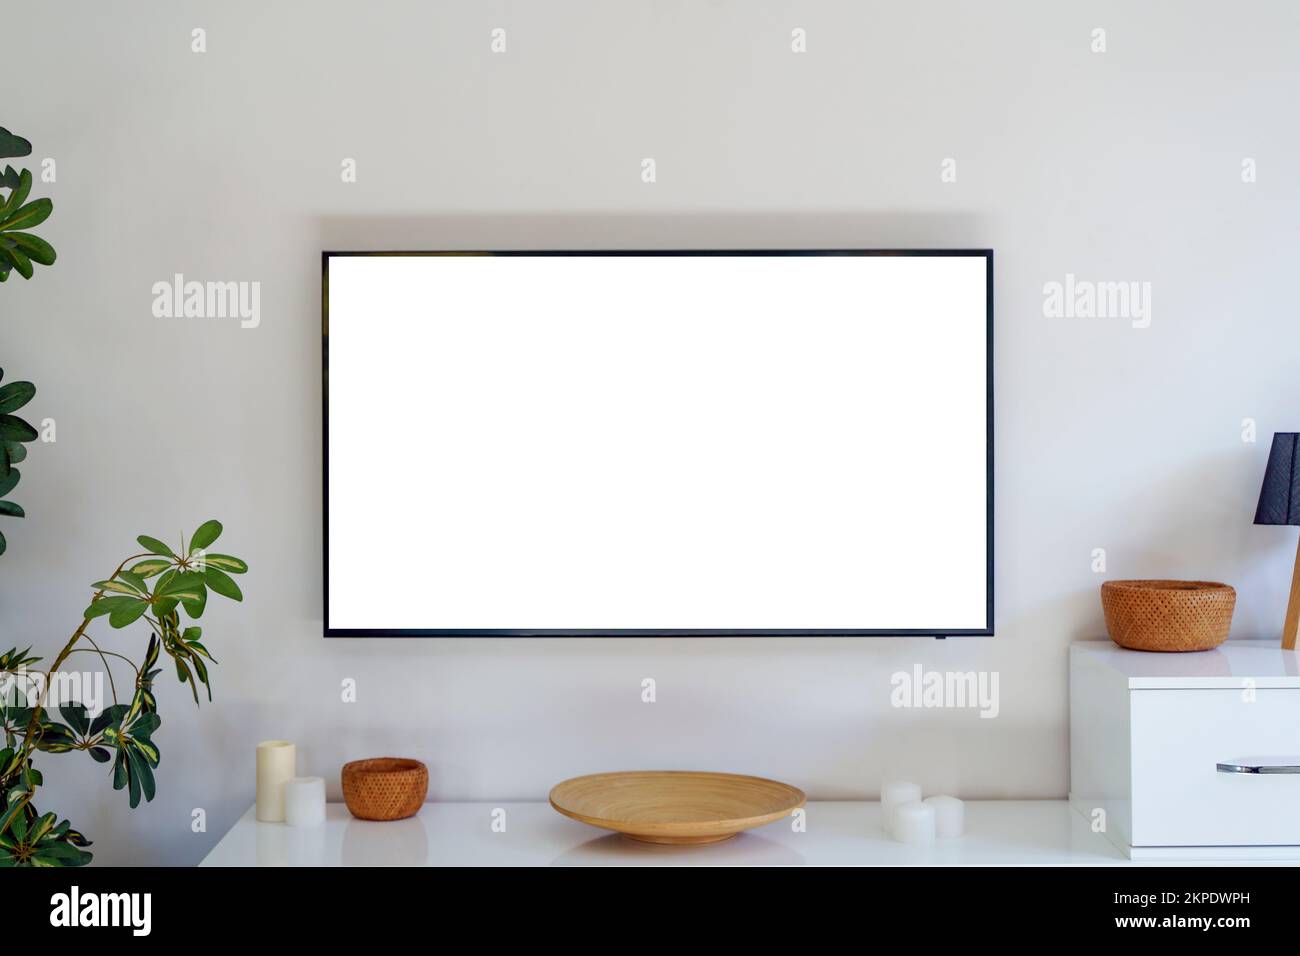 TV led mock up screen. Smart TV on a wall in an empty white interior living room. High quality photo Stock Photo